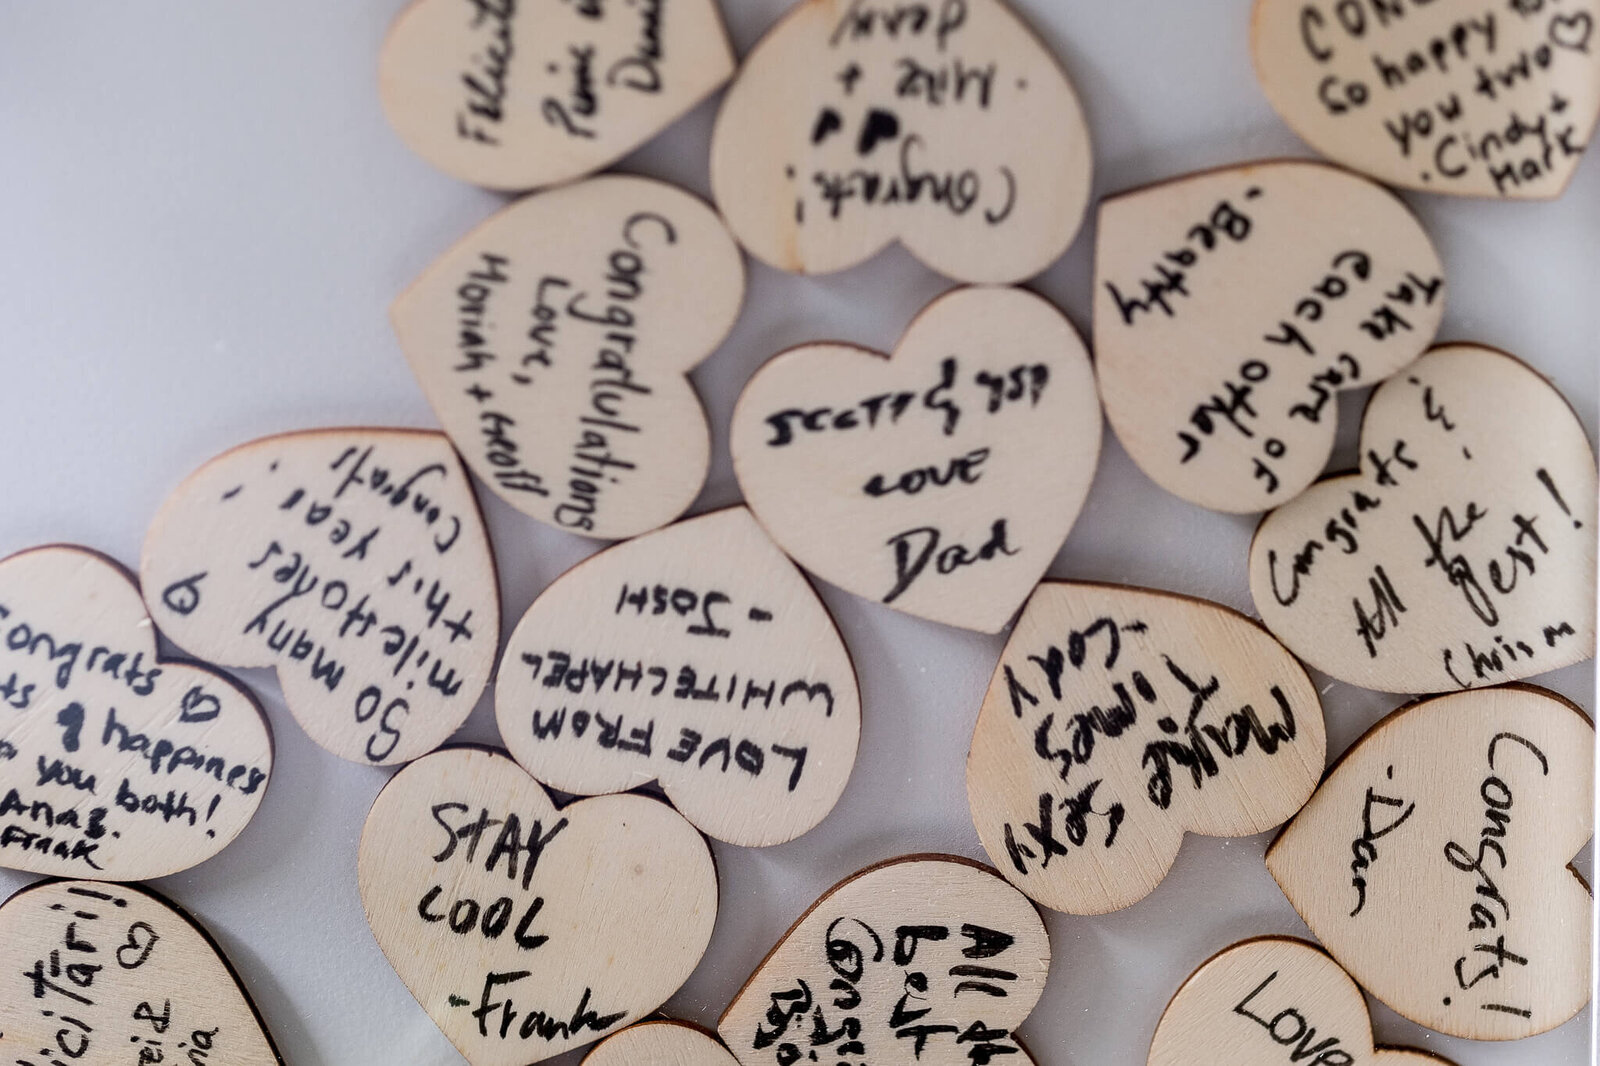 Wooden hearts with messages from wedding guests.